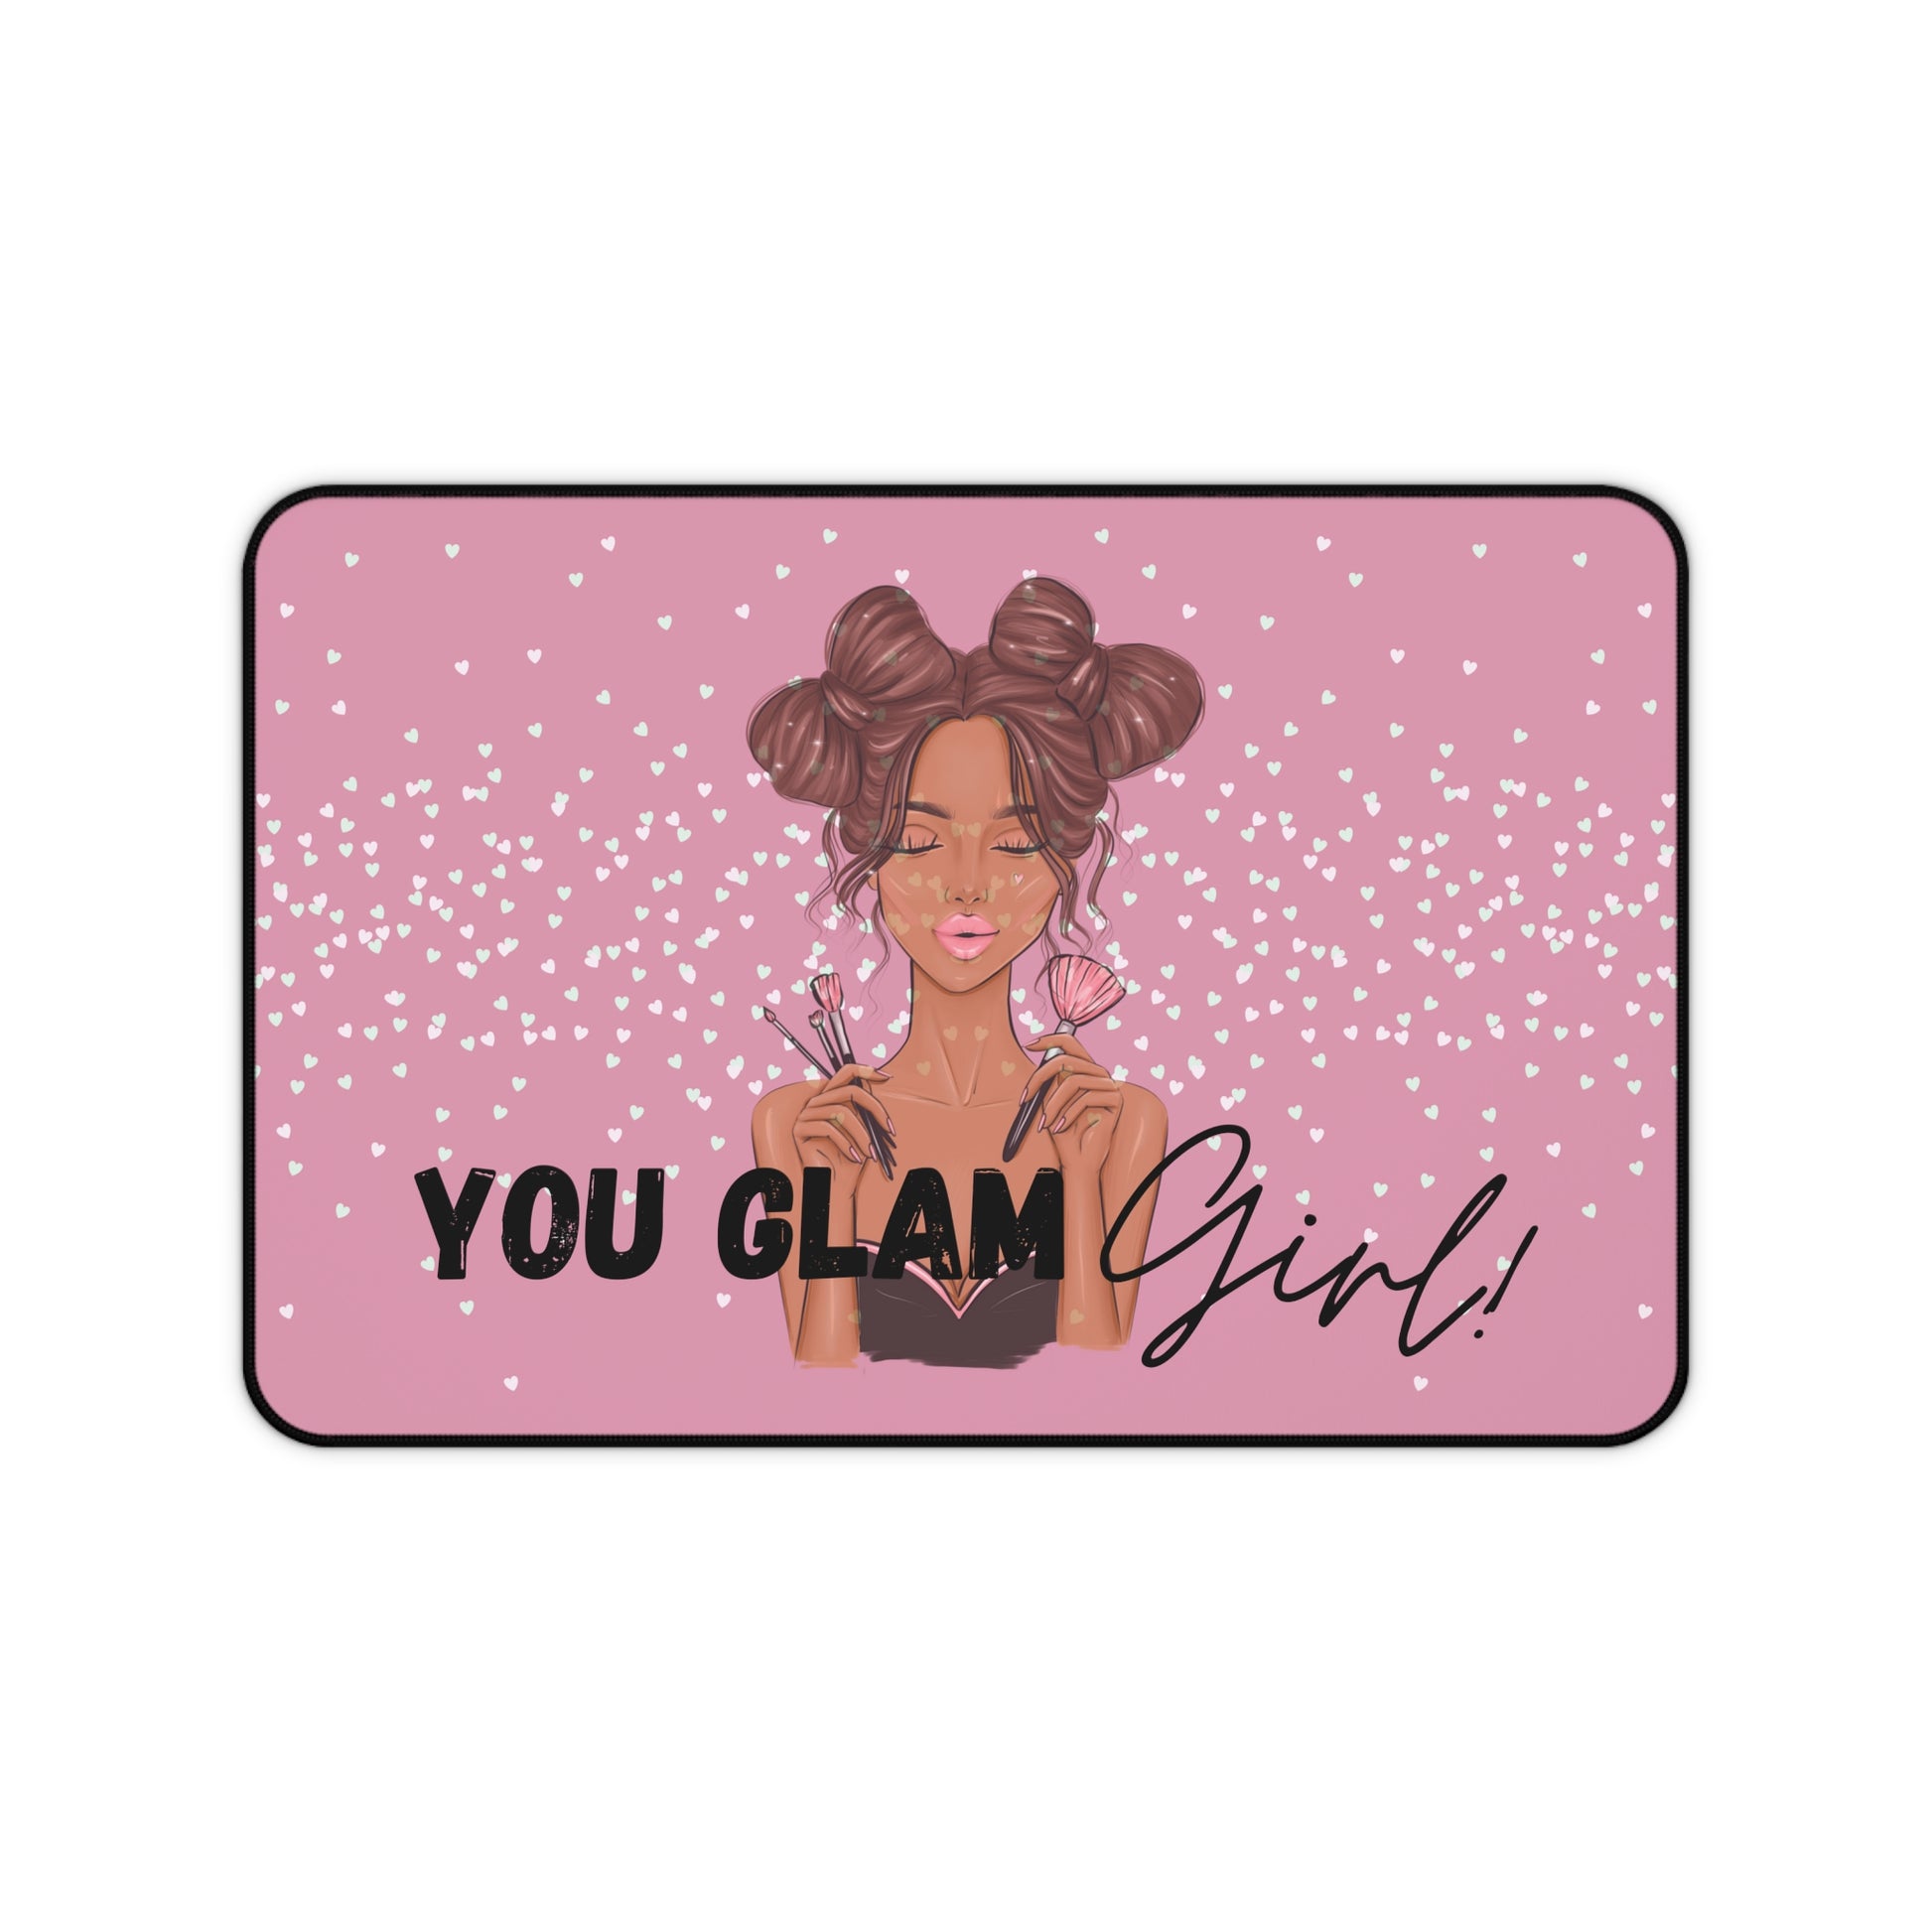 The Glam Mat